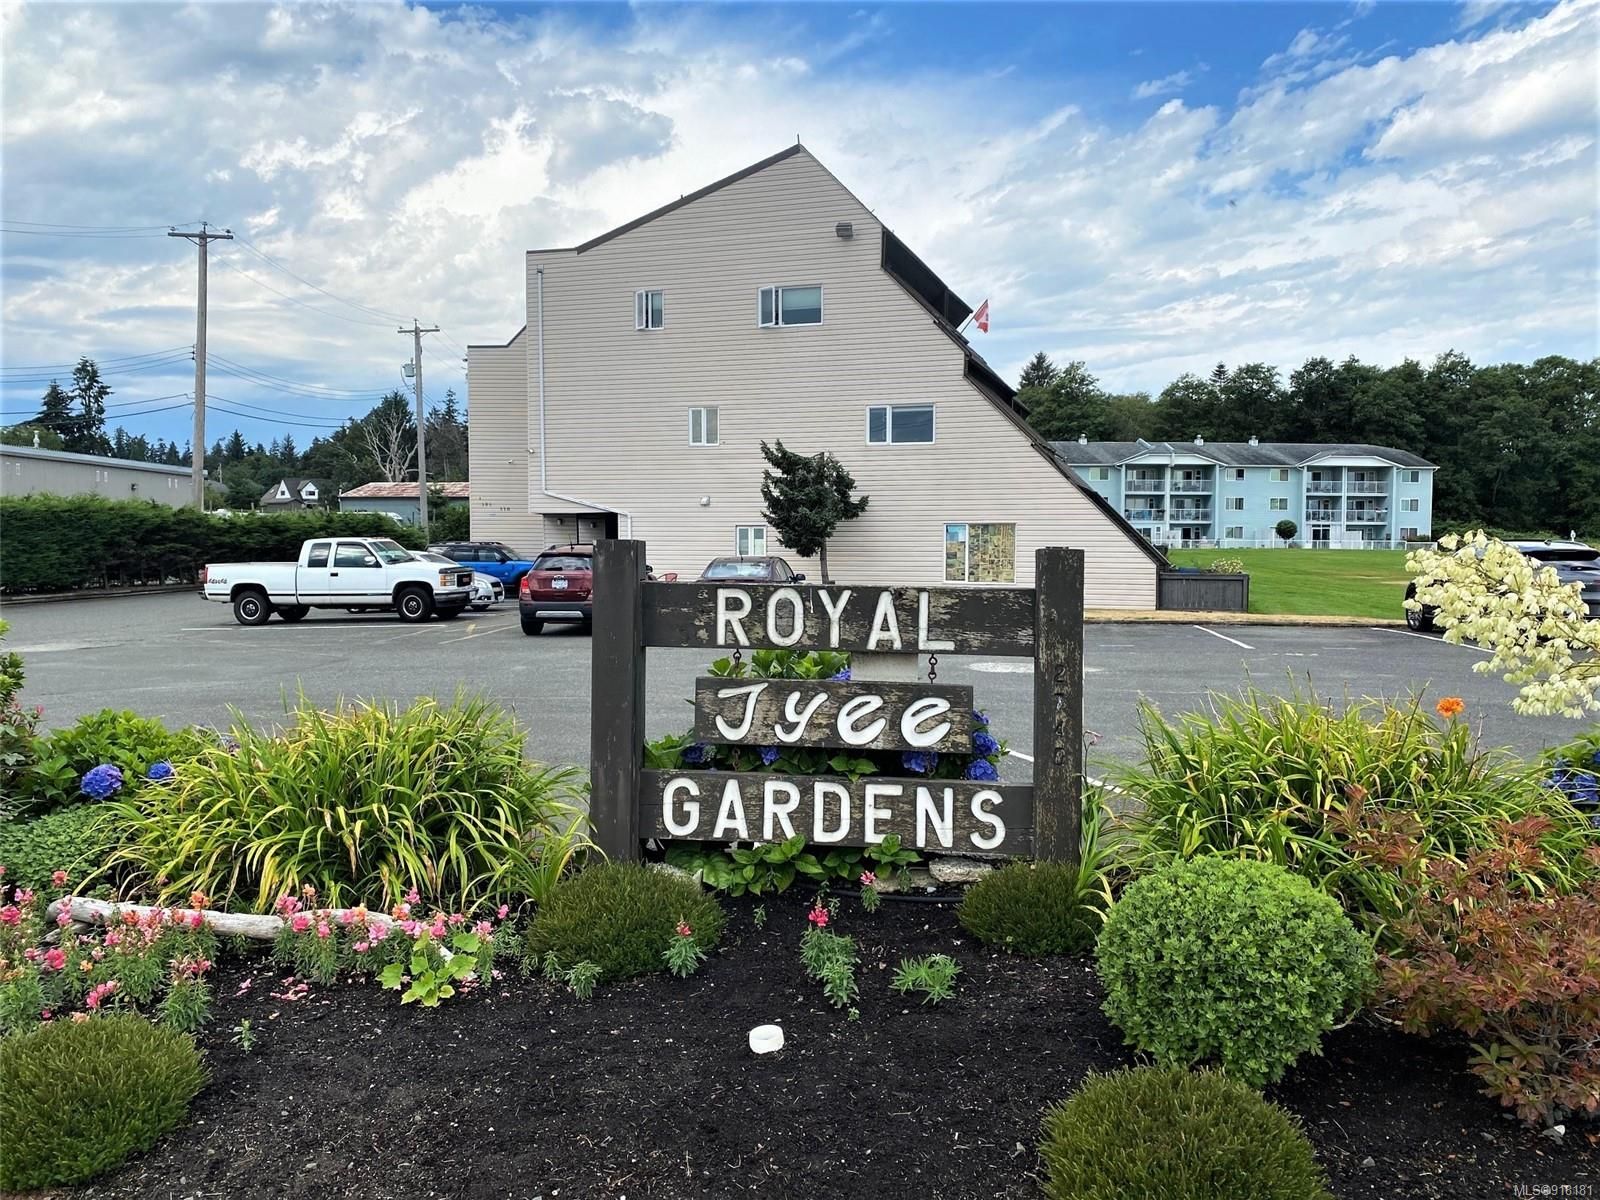 Welcome to the Royal Tyee Gardens!